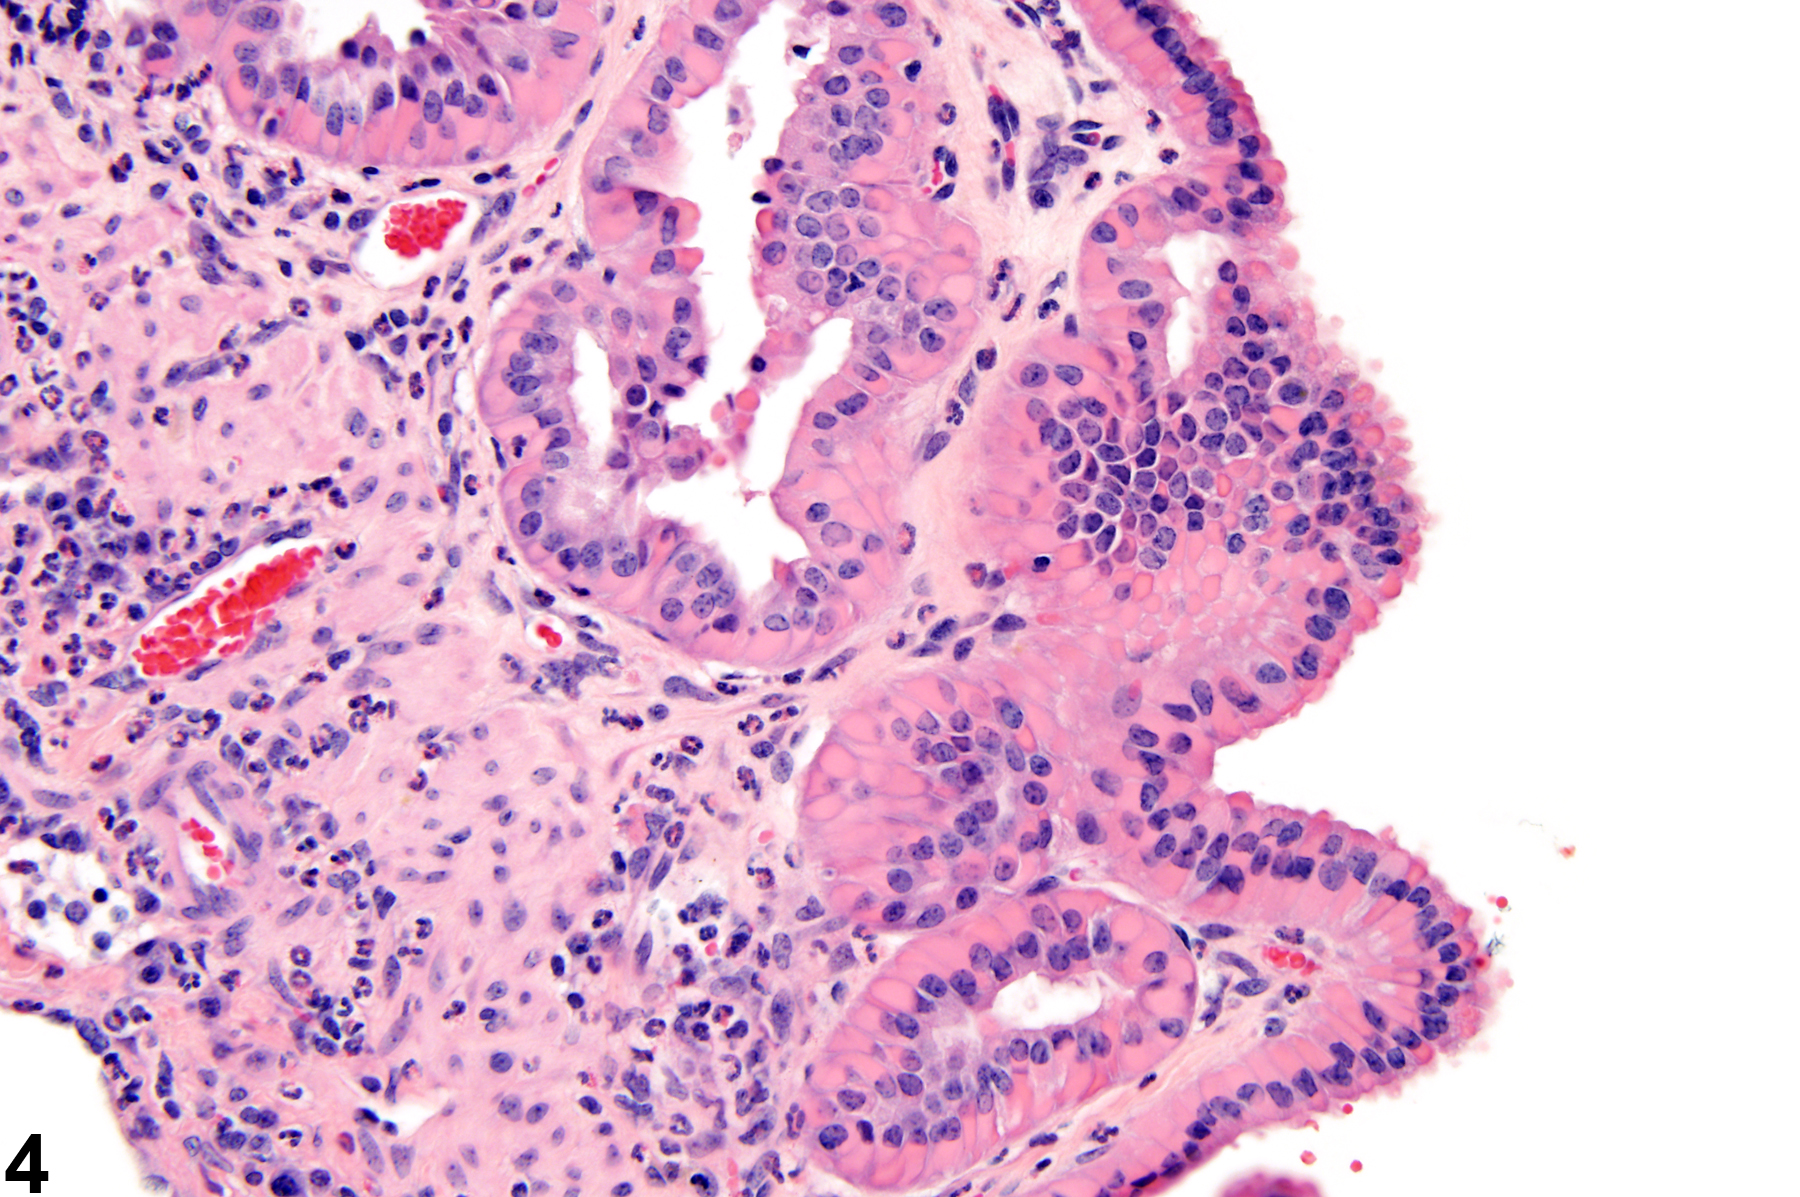 Image of inflammation in the gallbladder from a male  B6C3F1 mouse in a chronic study